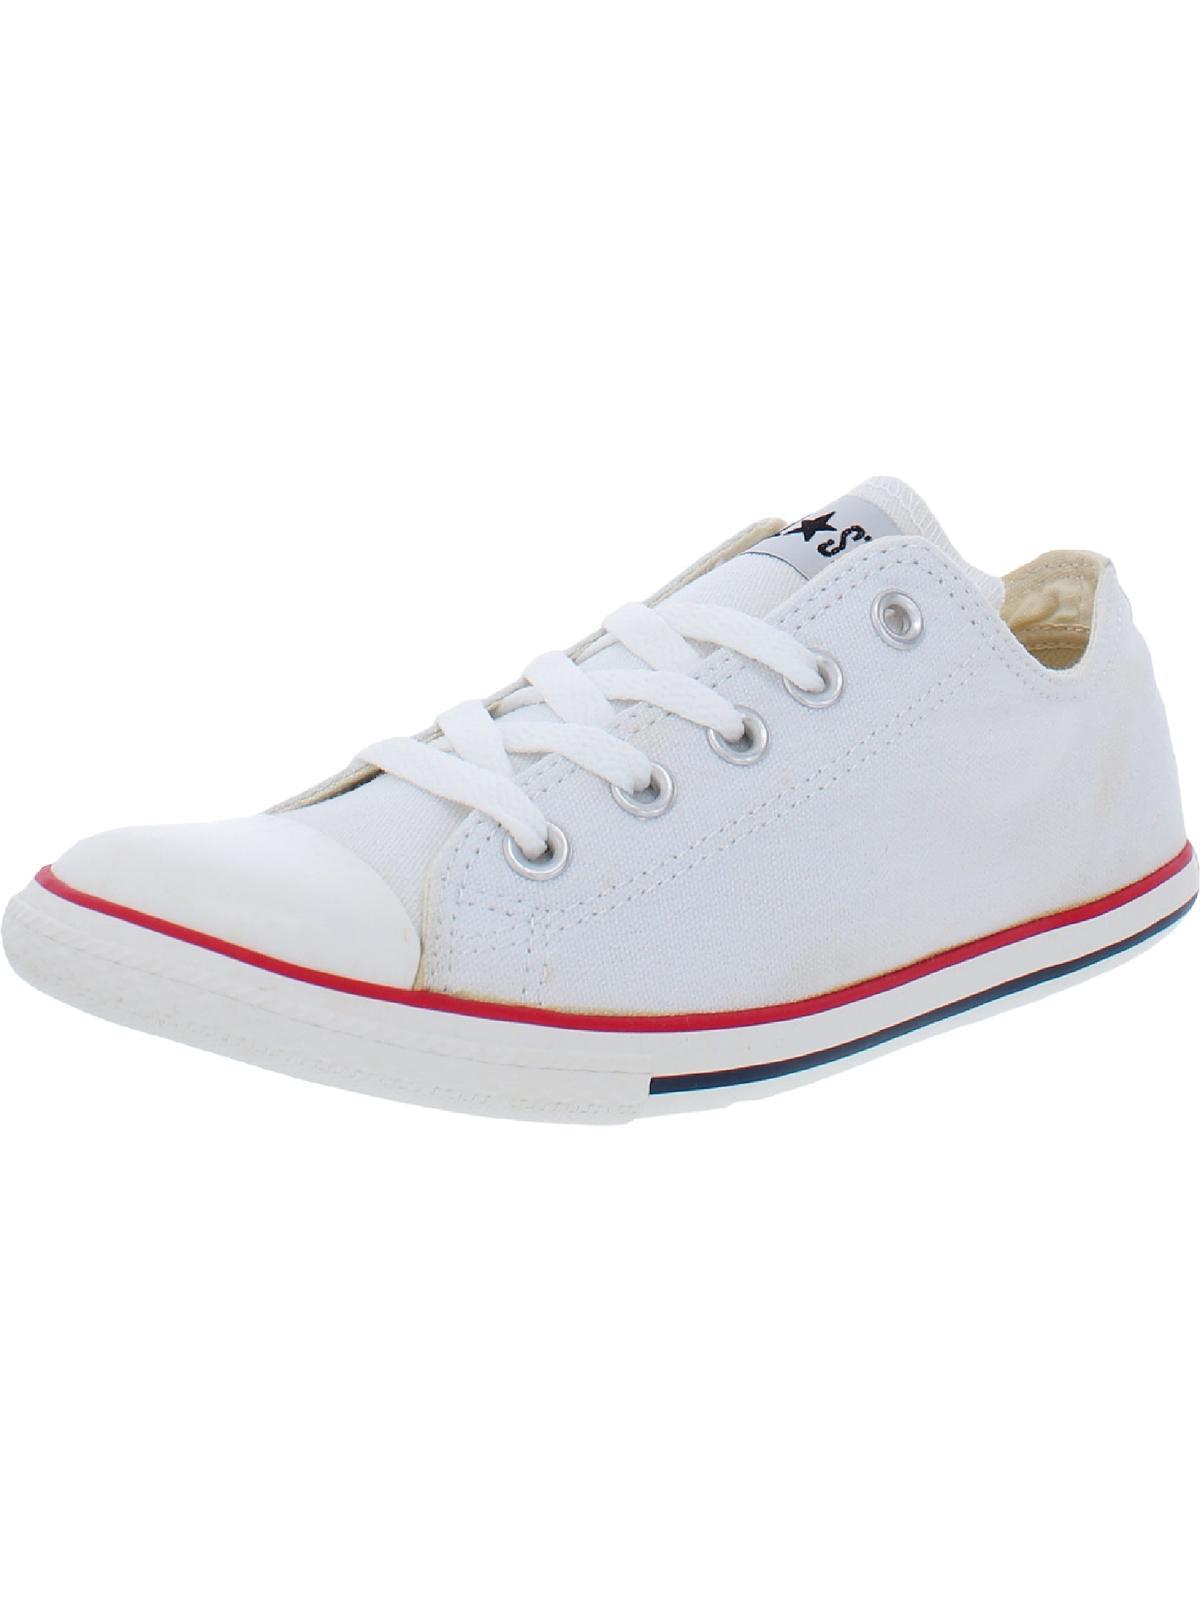 Converse Ct Slim Ox Gym Retro Casual And Fashion Sneakers in White | Lyst